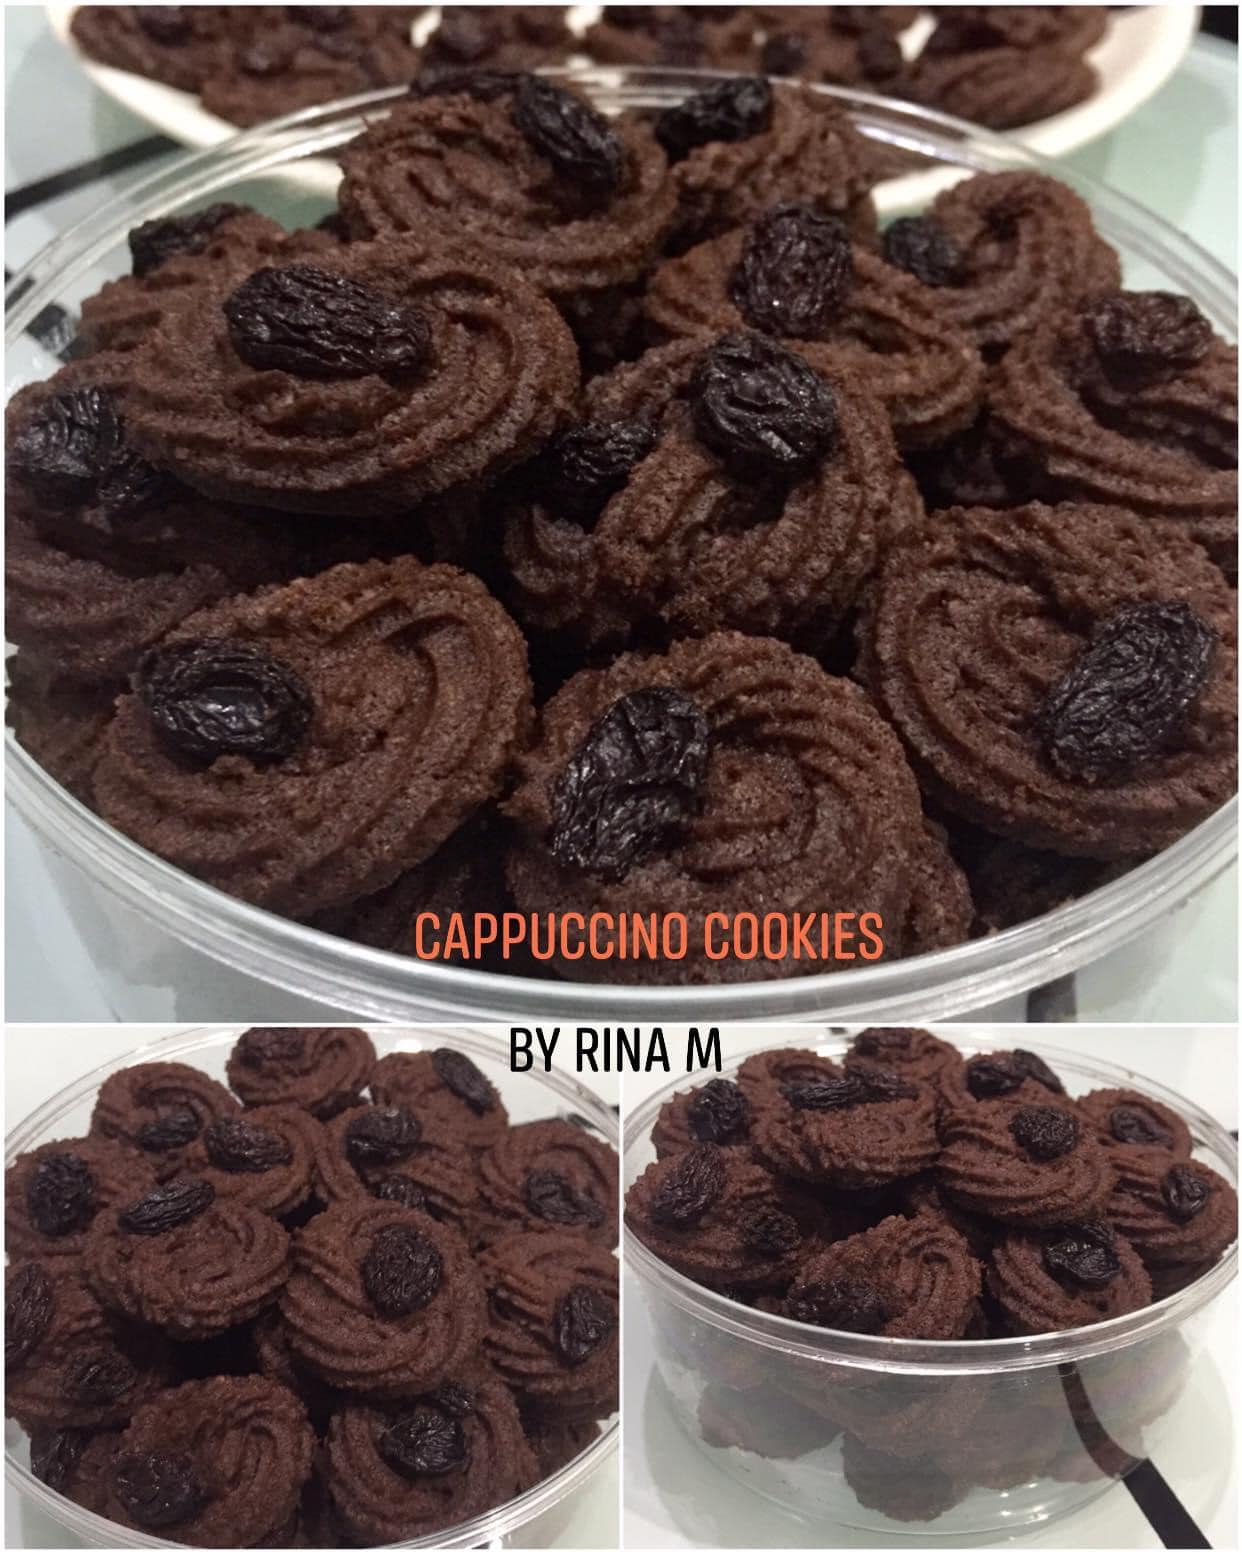 Cappuccino Cookies by Rina M